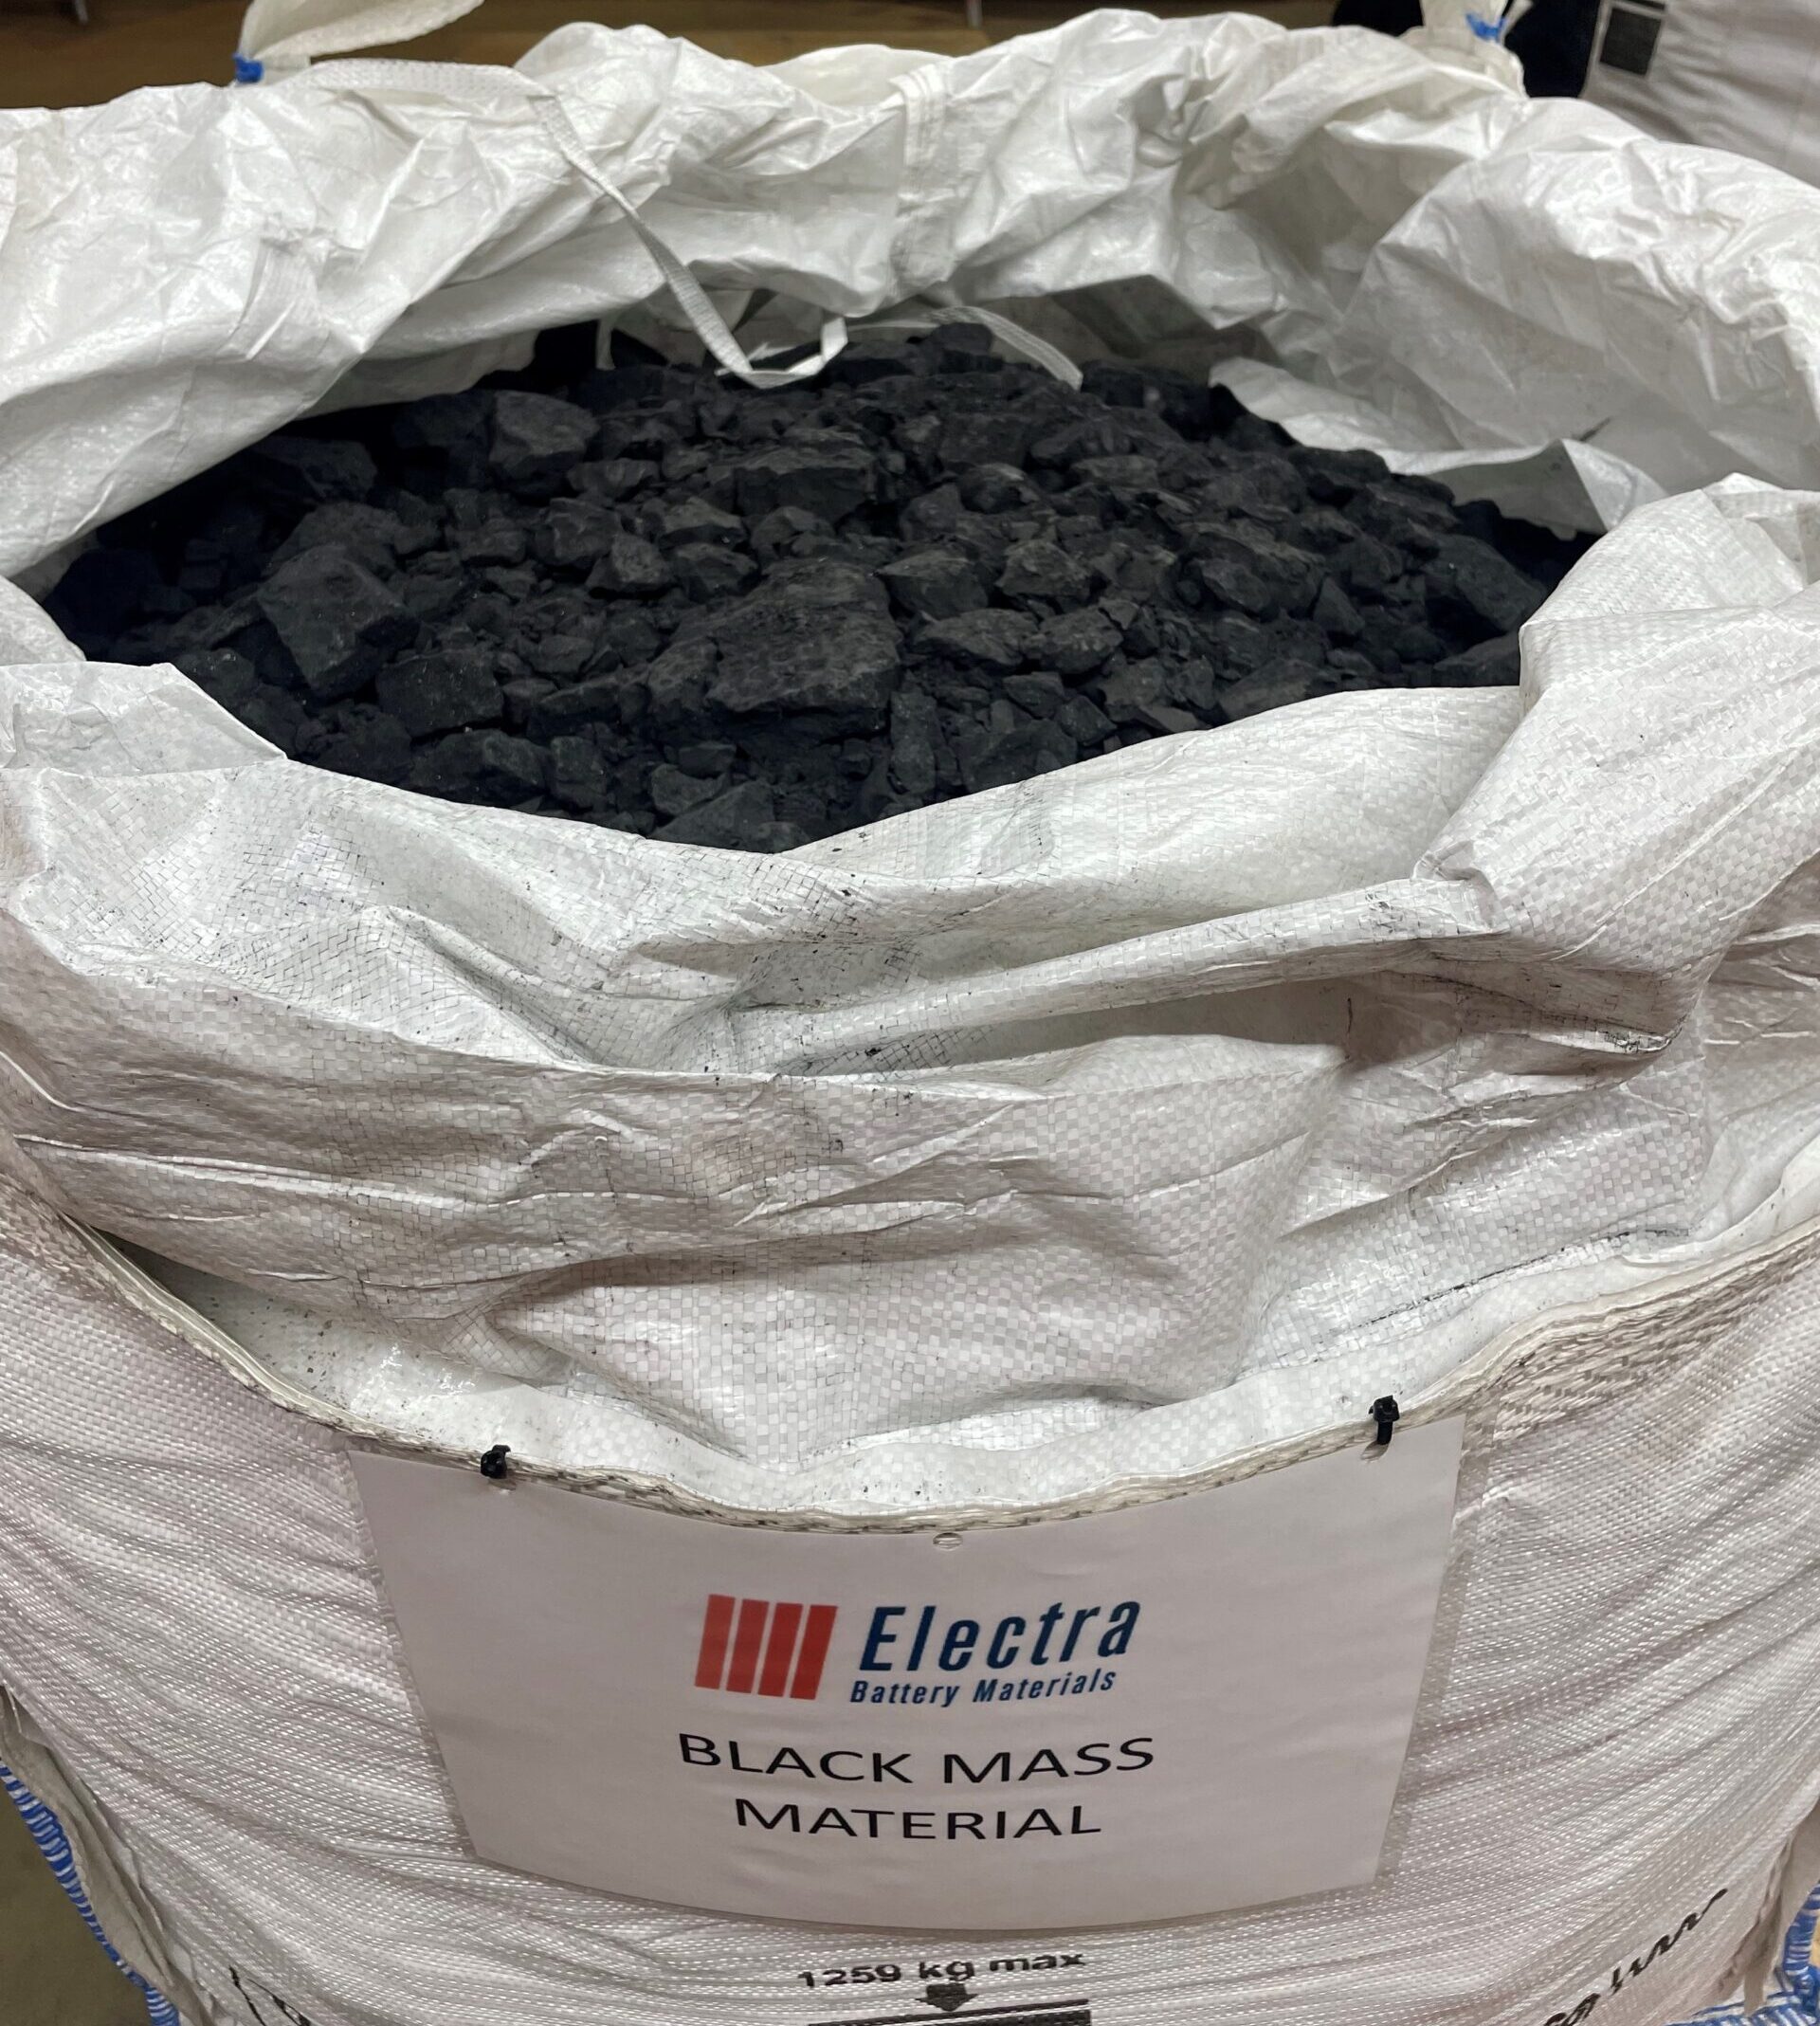 Electra has recovered another high value element in its black mass trial